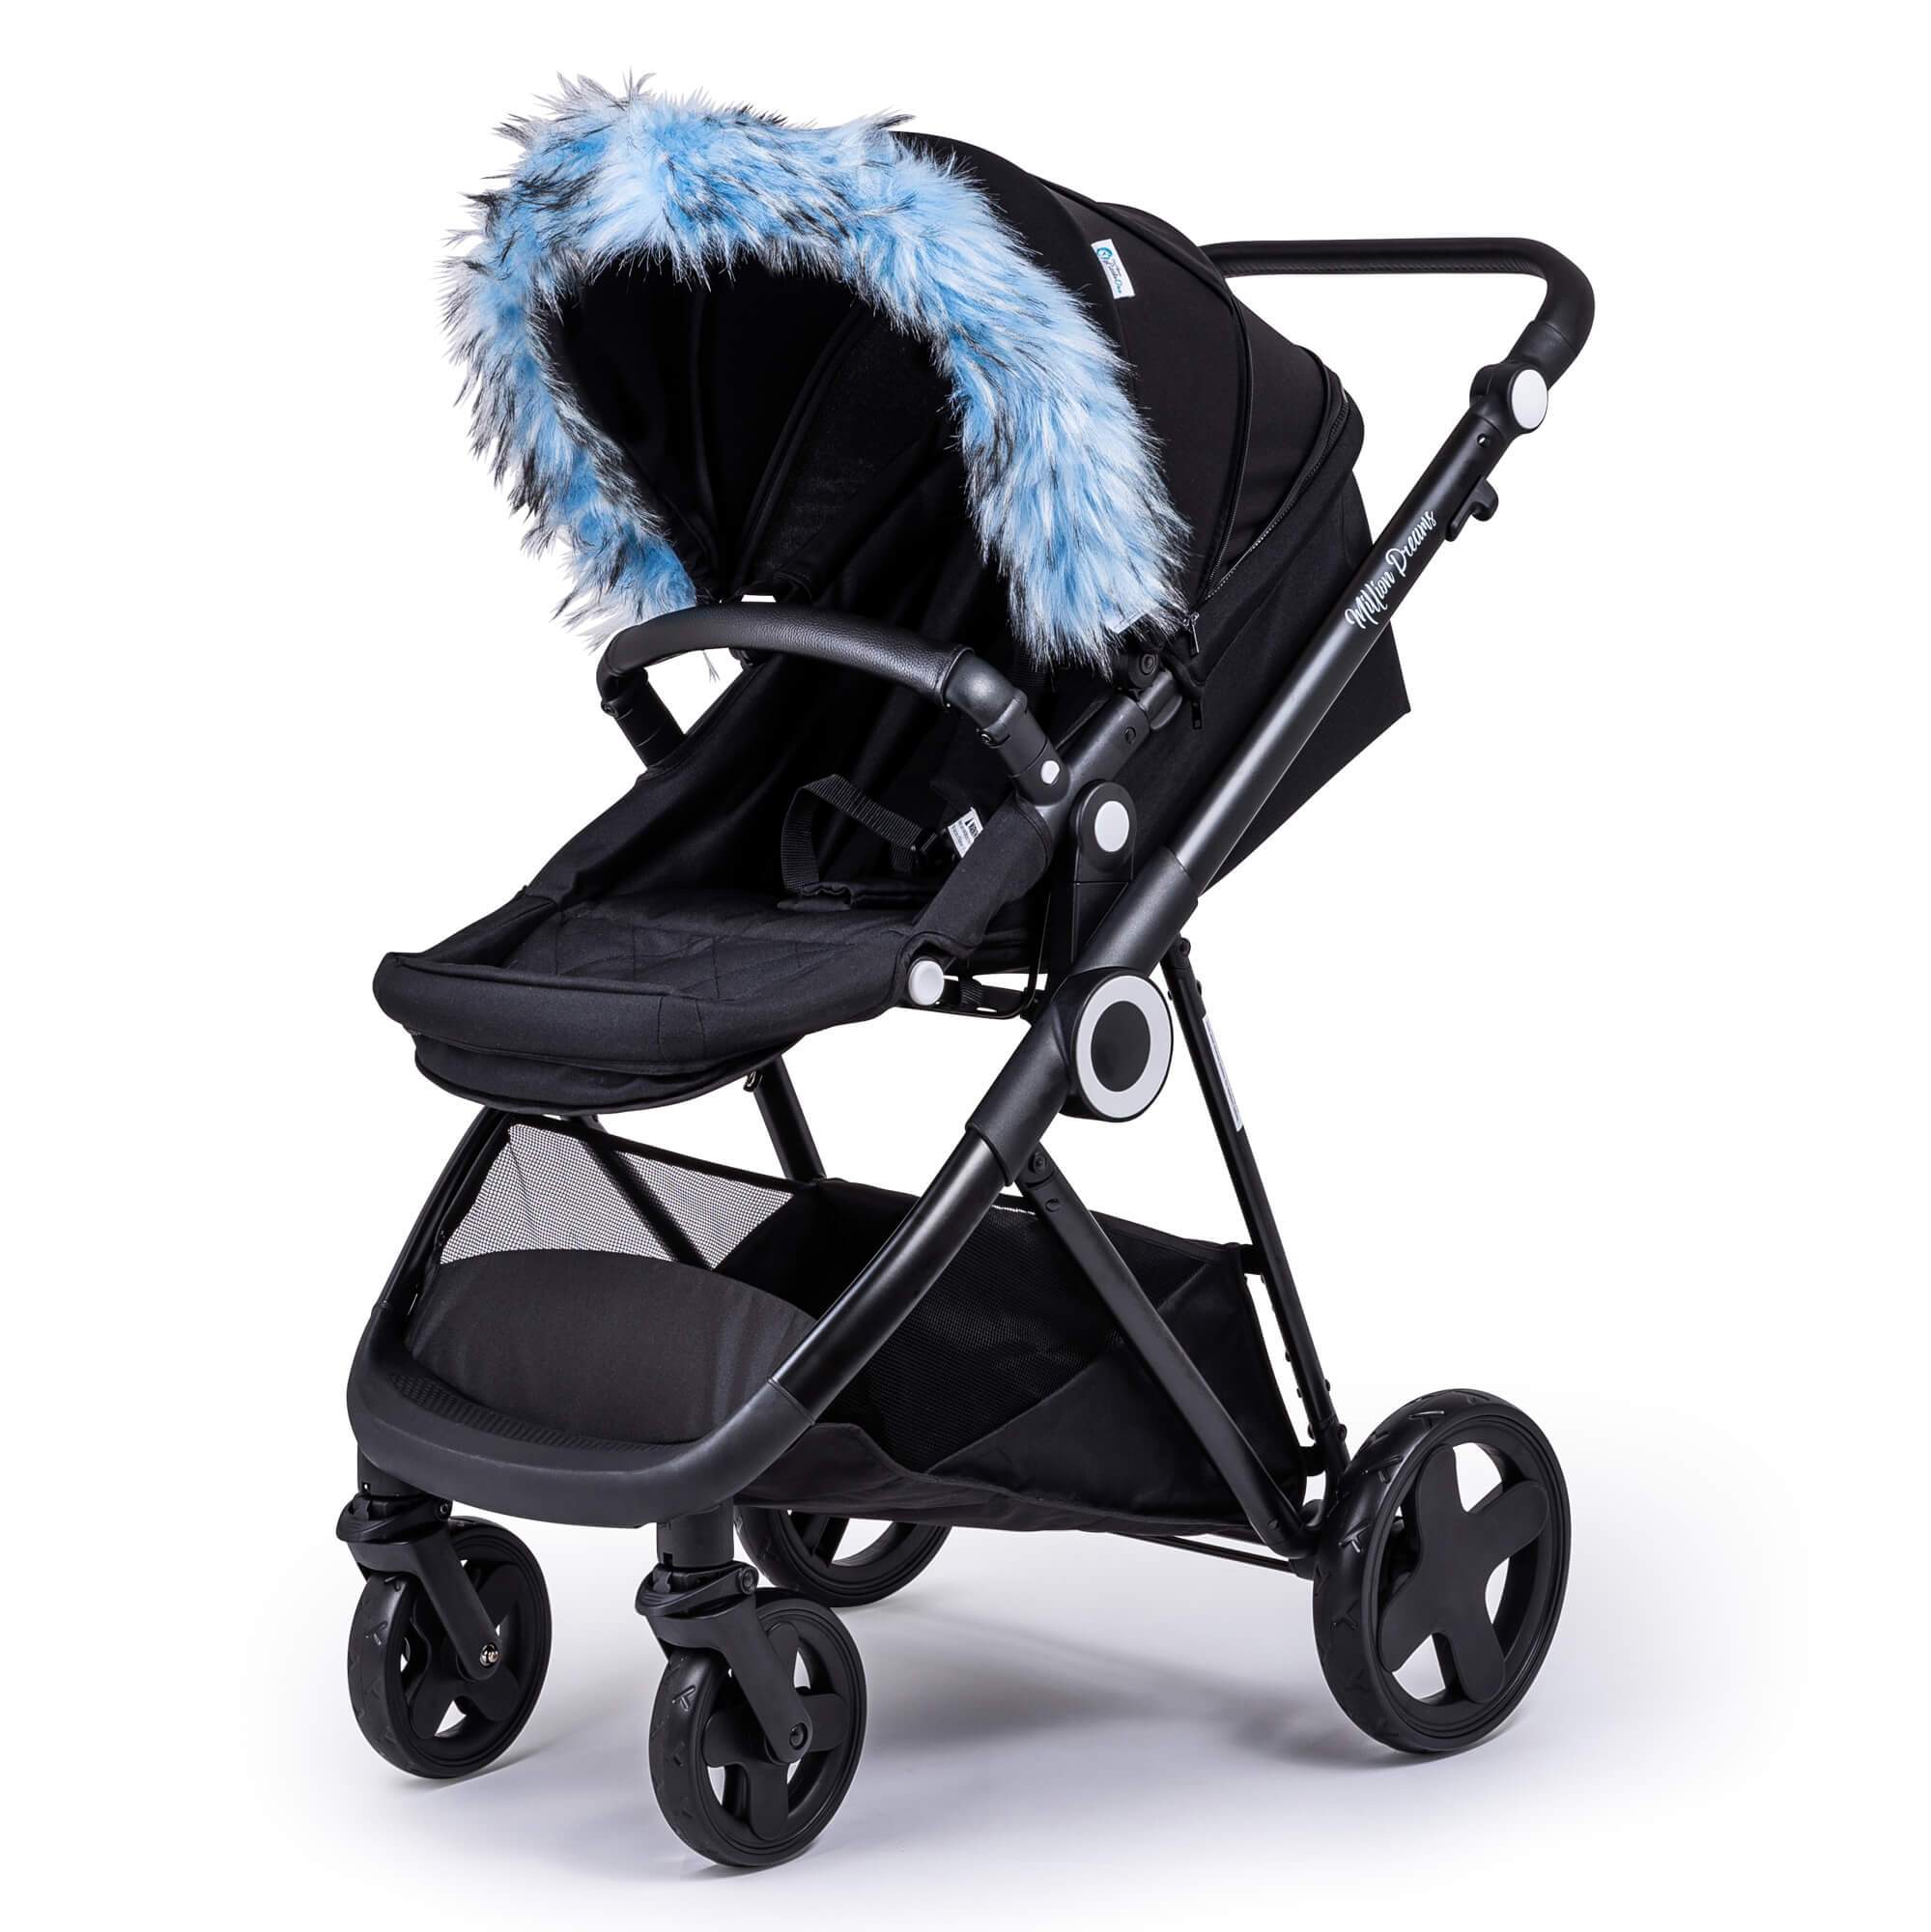 Pram Fur Hood Trim Attachment for Pushchair Compatible with Easywalker - Light Blue / Fits All Models | For Your Little One